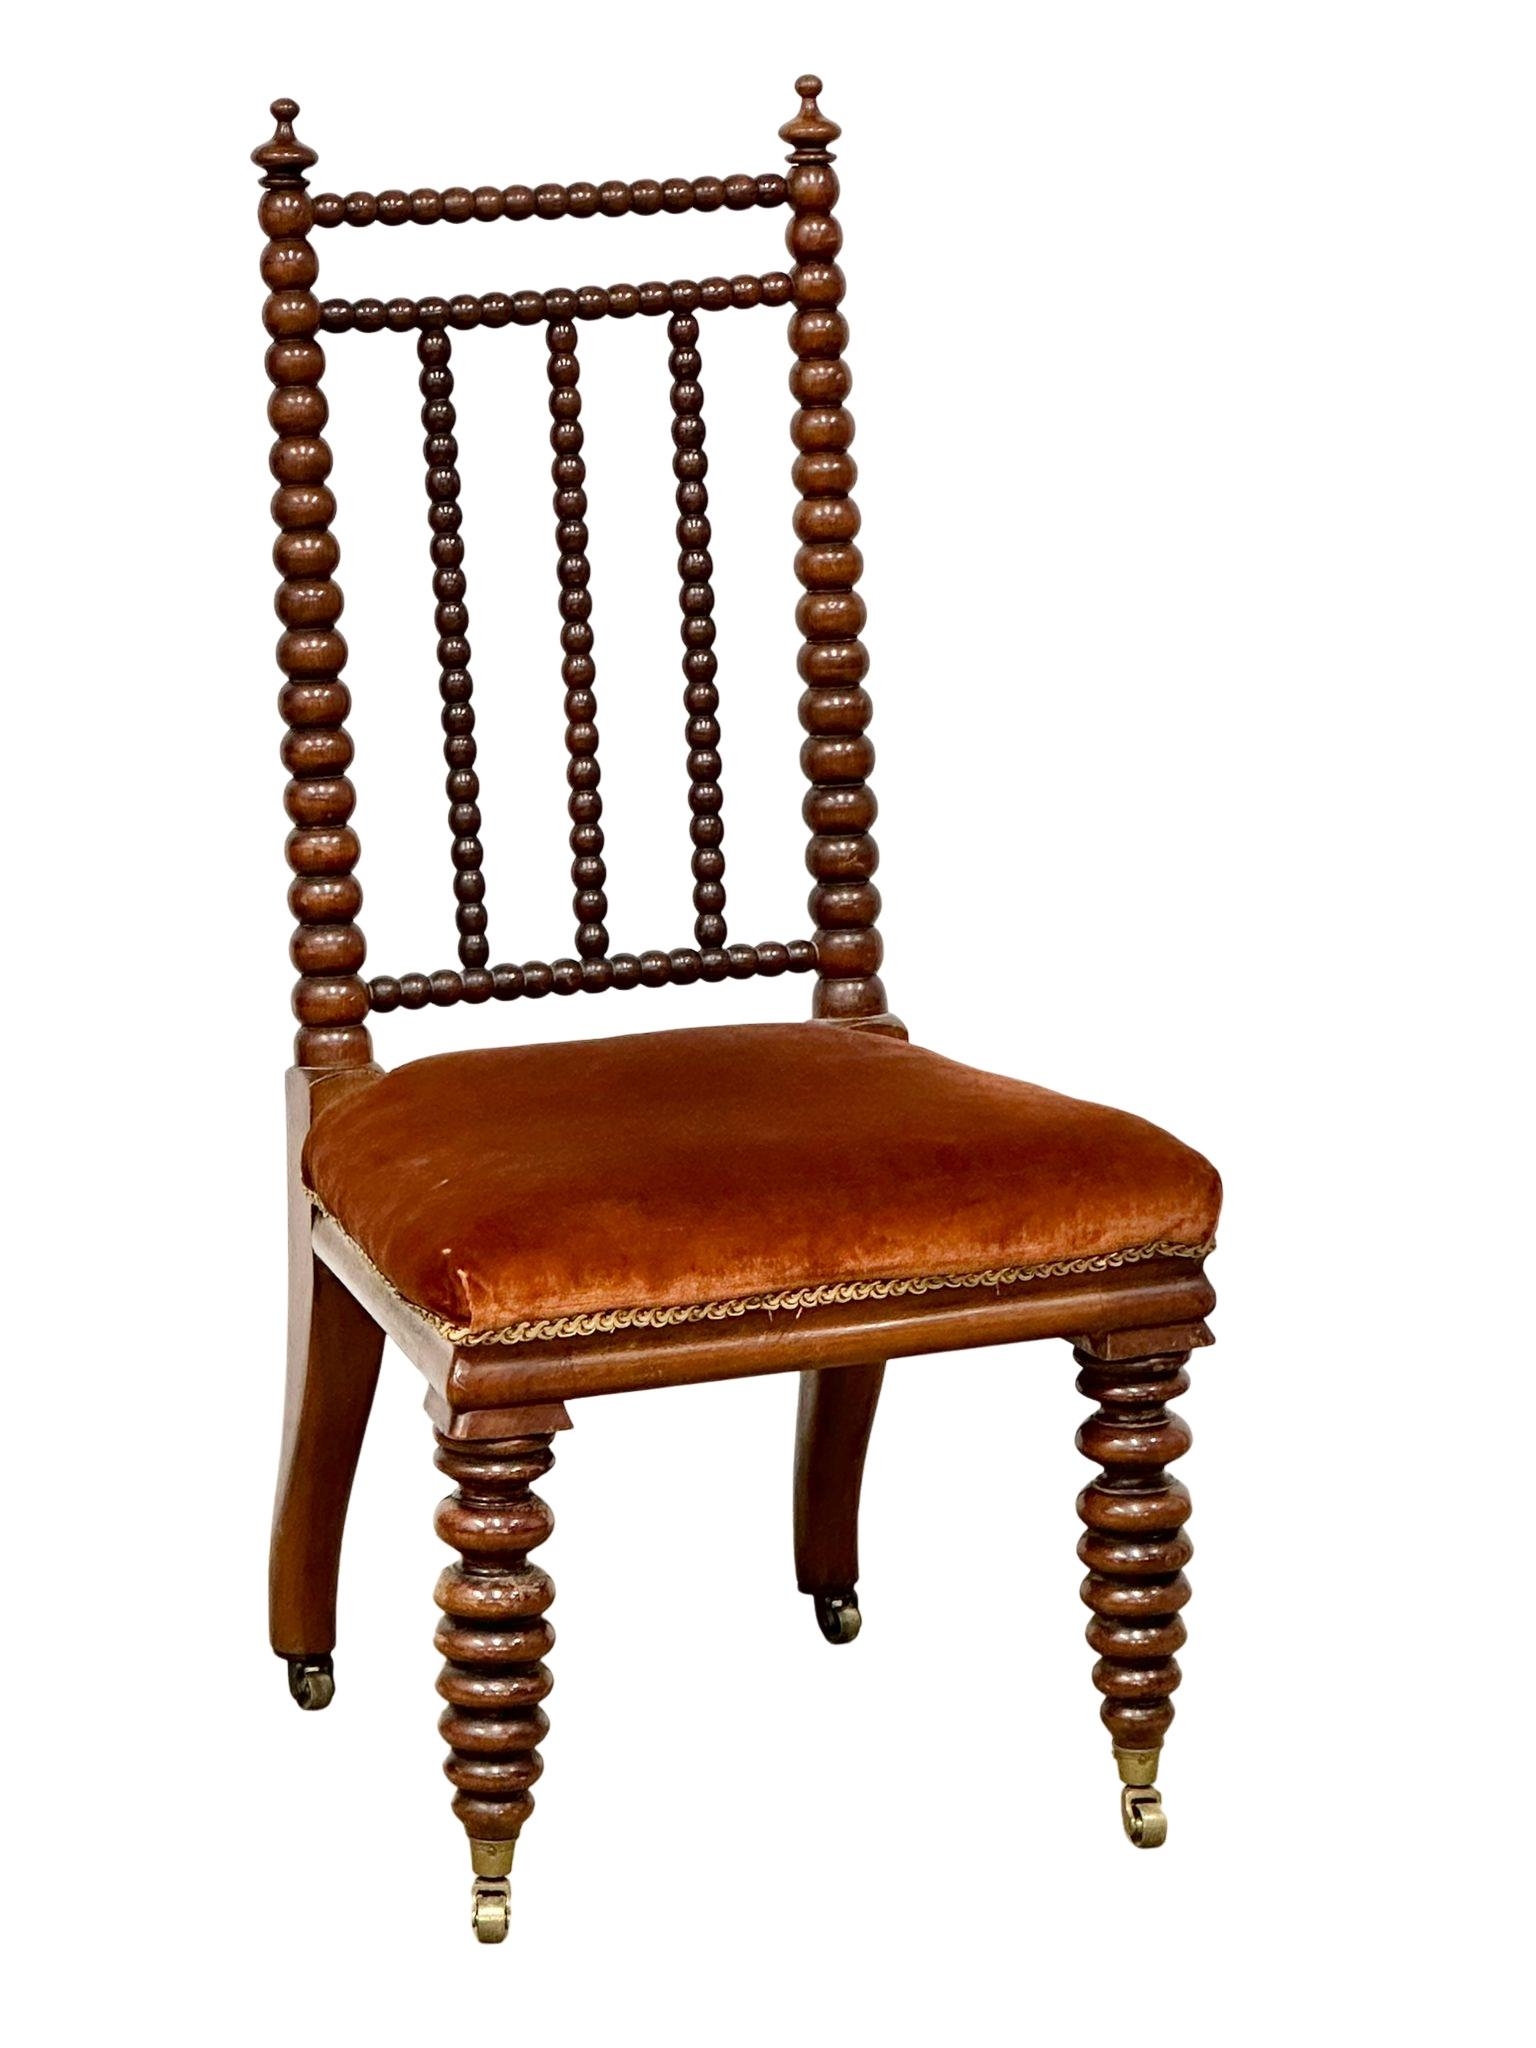 A Victorian walnut Bobbin Turn side chair on brass cup casters, circa 1850-70s. 8